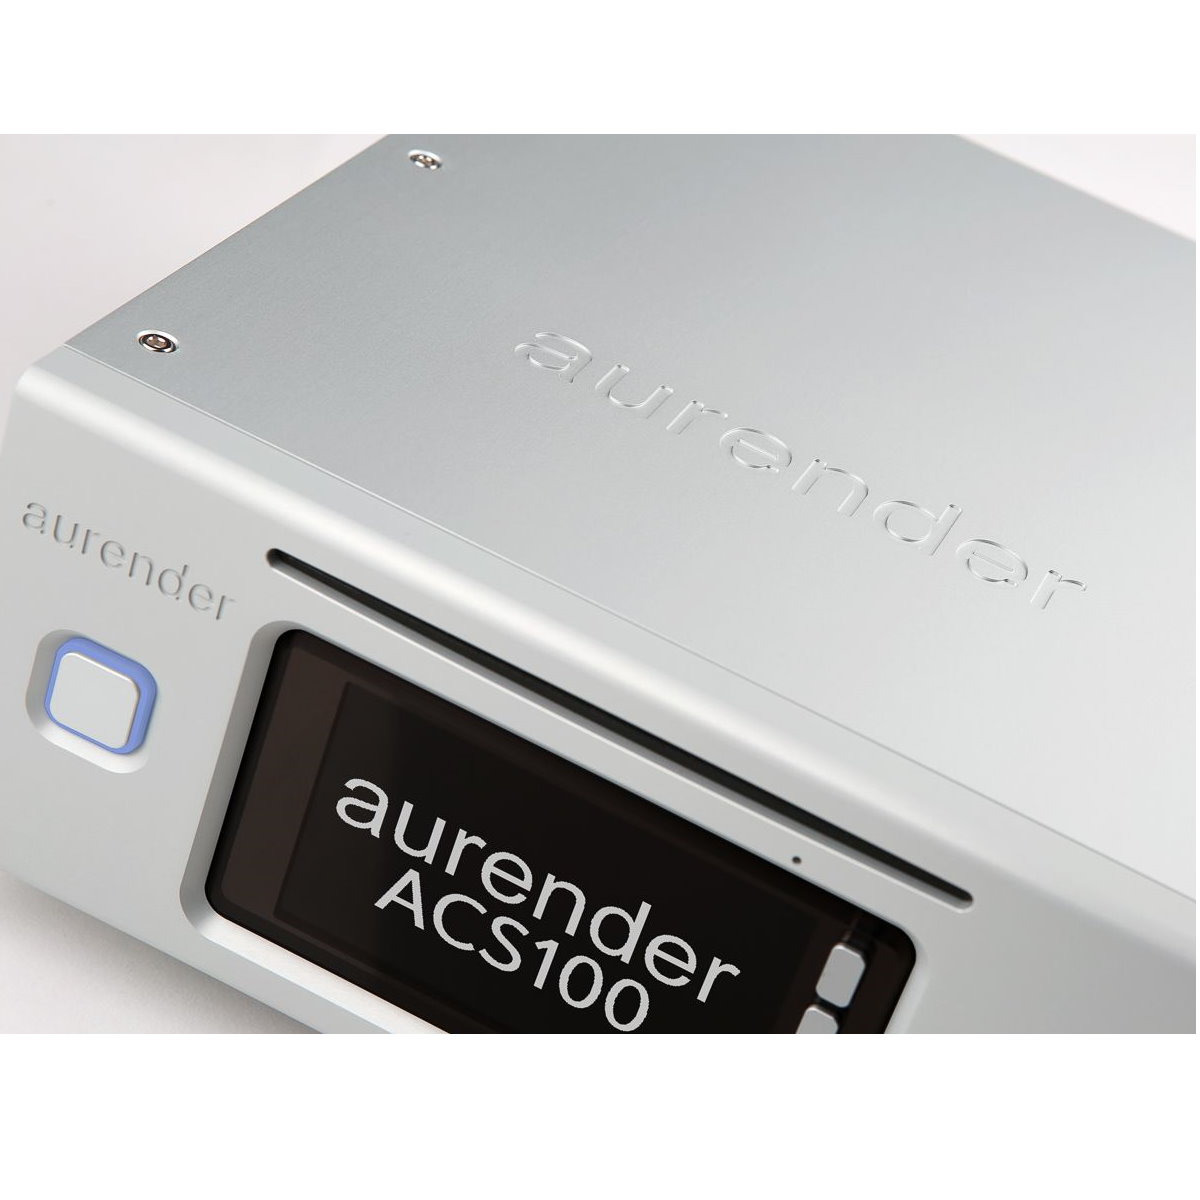 Aurender ACS100 Music Server/Streamer with CD Ripper with Dual HDD Storage Bays